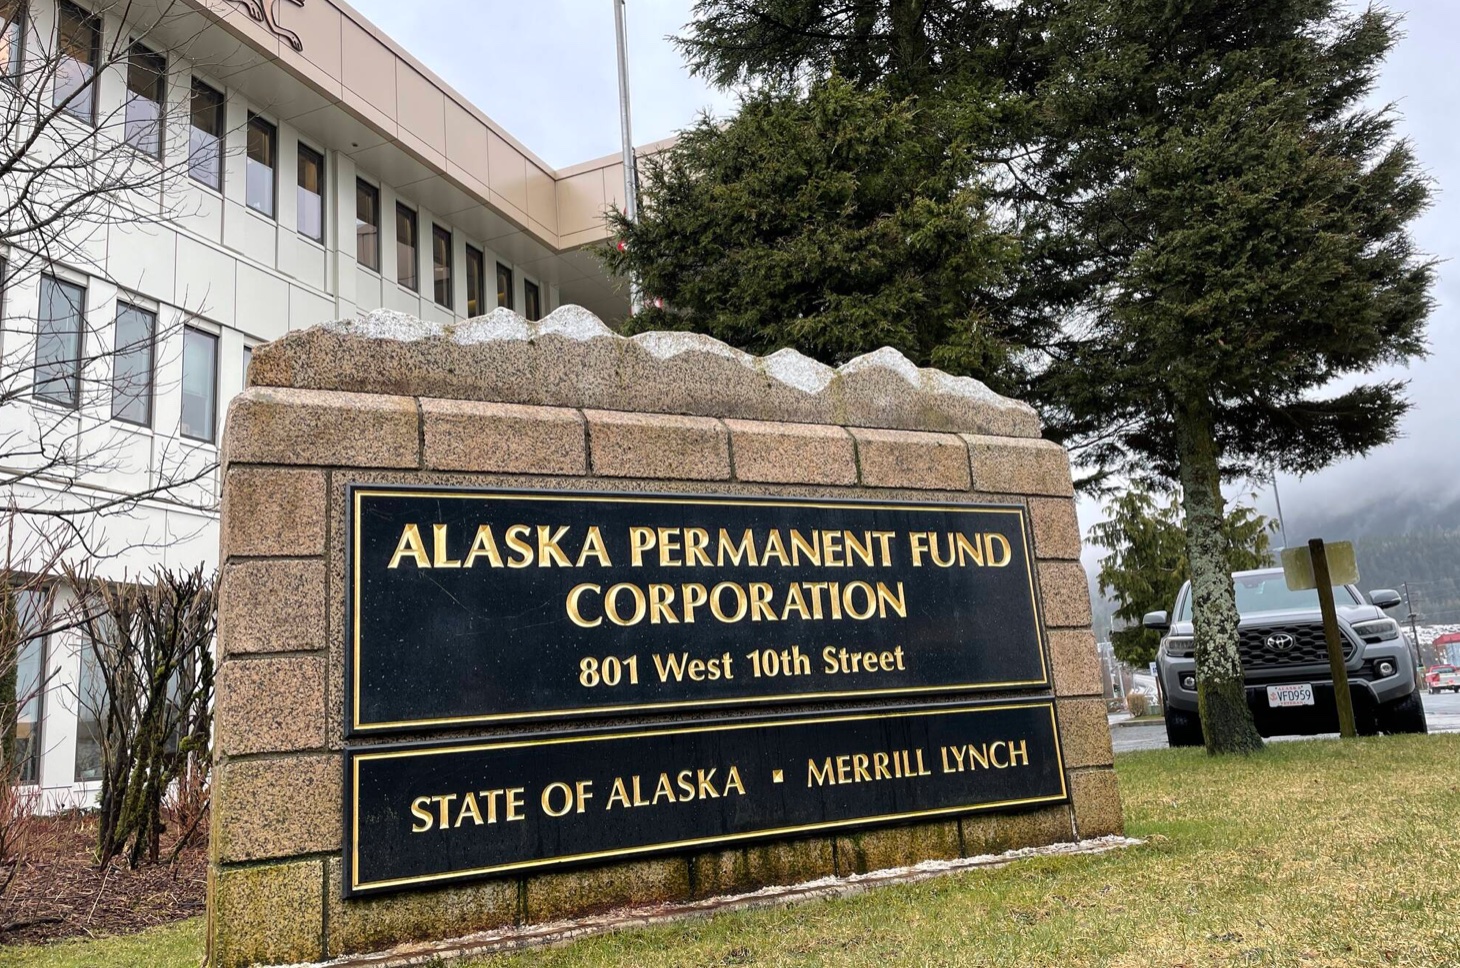 Alaska Permanent Fund committee tries to figure out how to stay out of media limelight